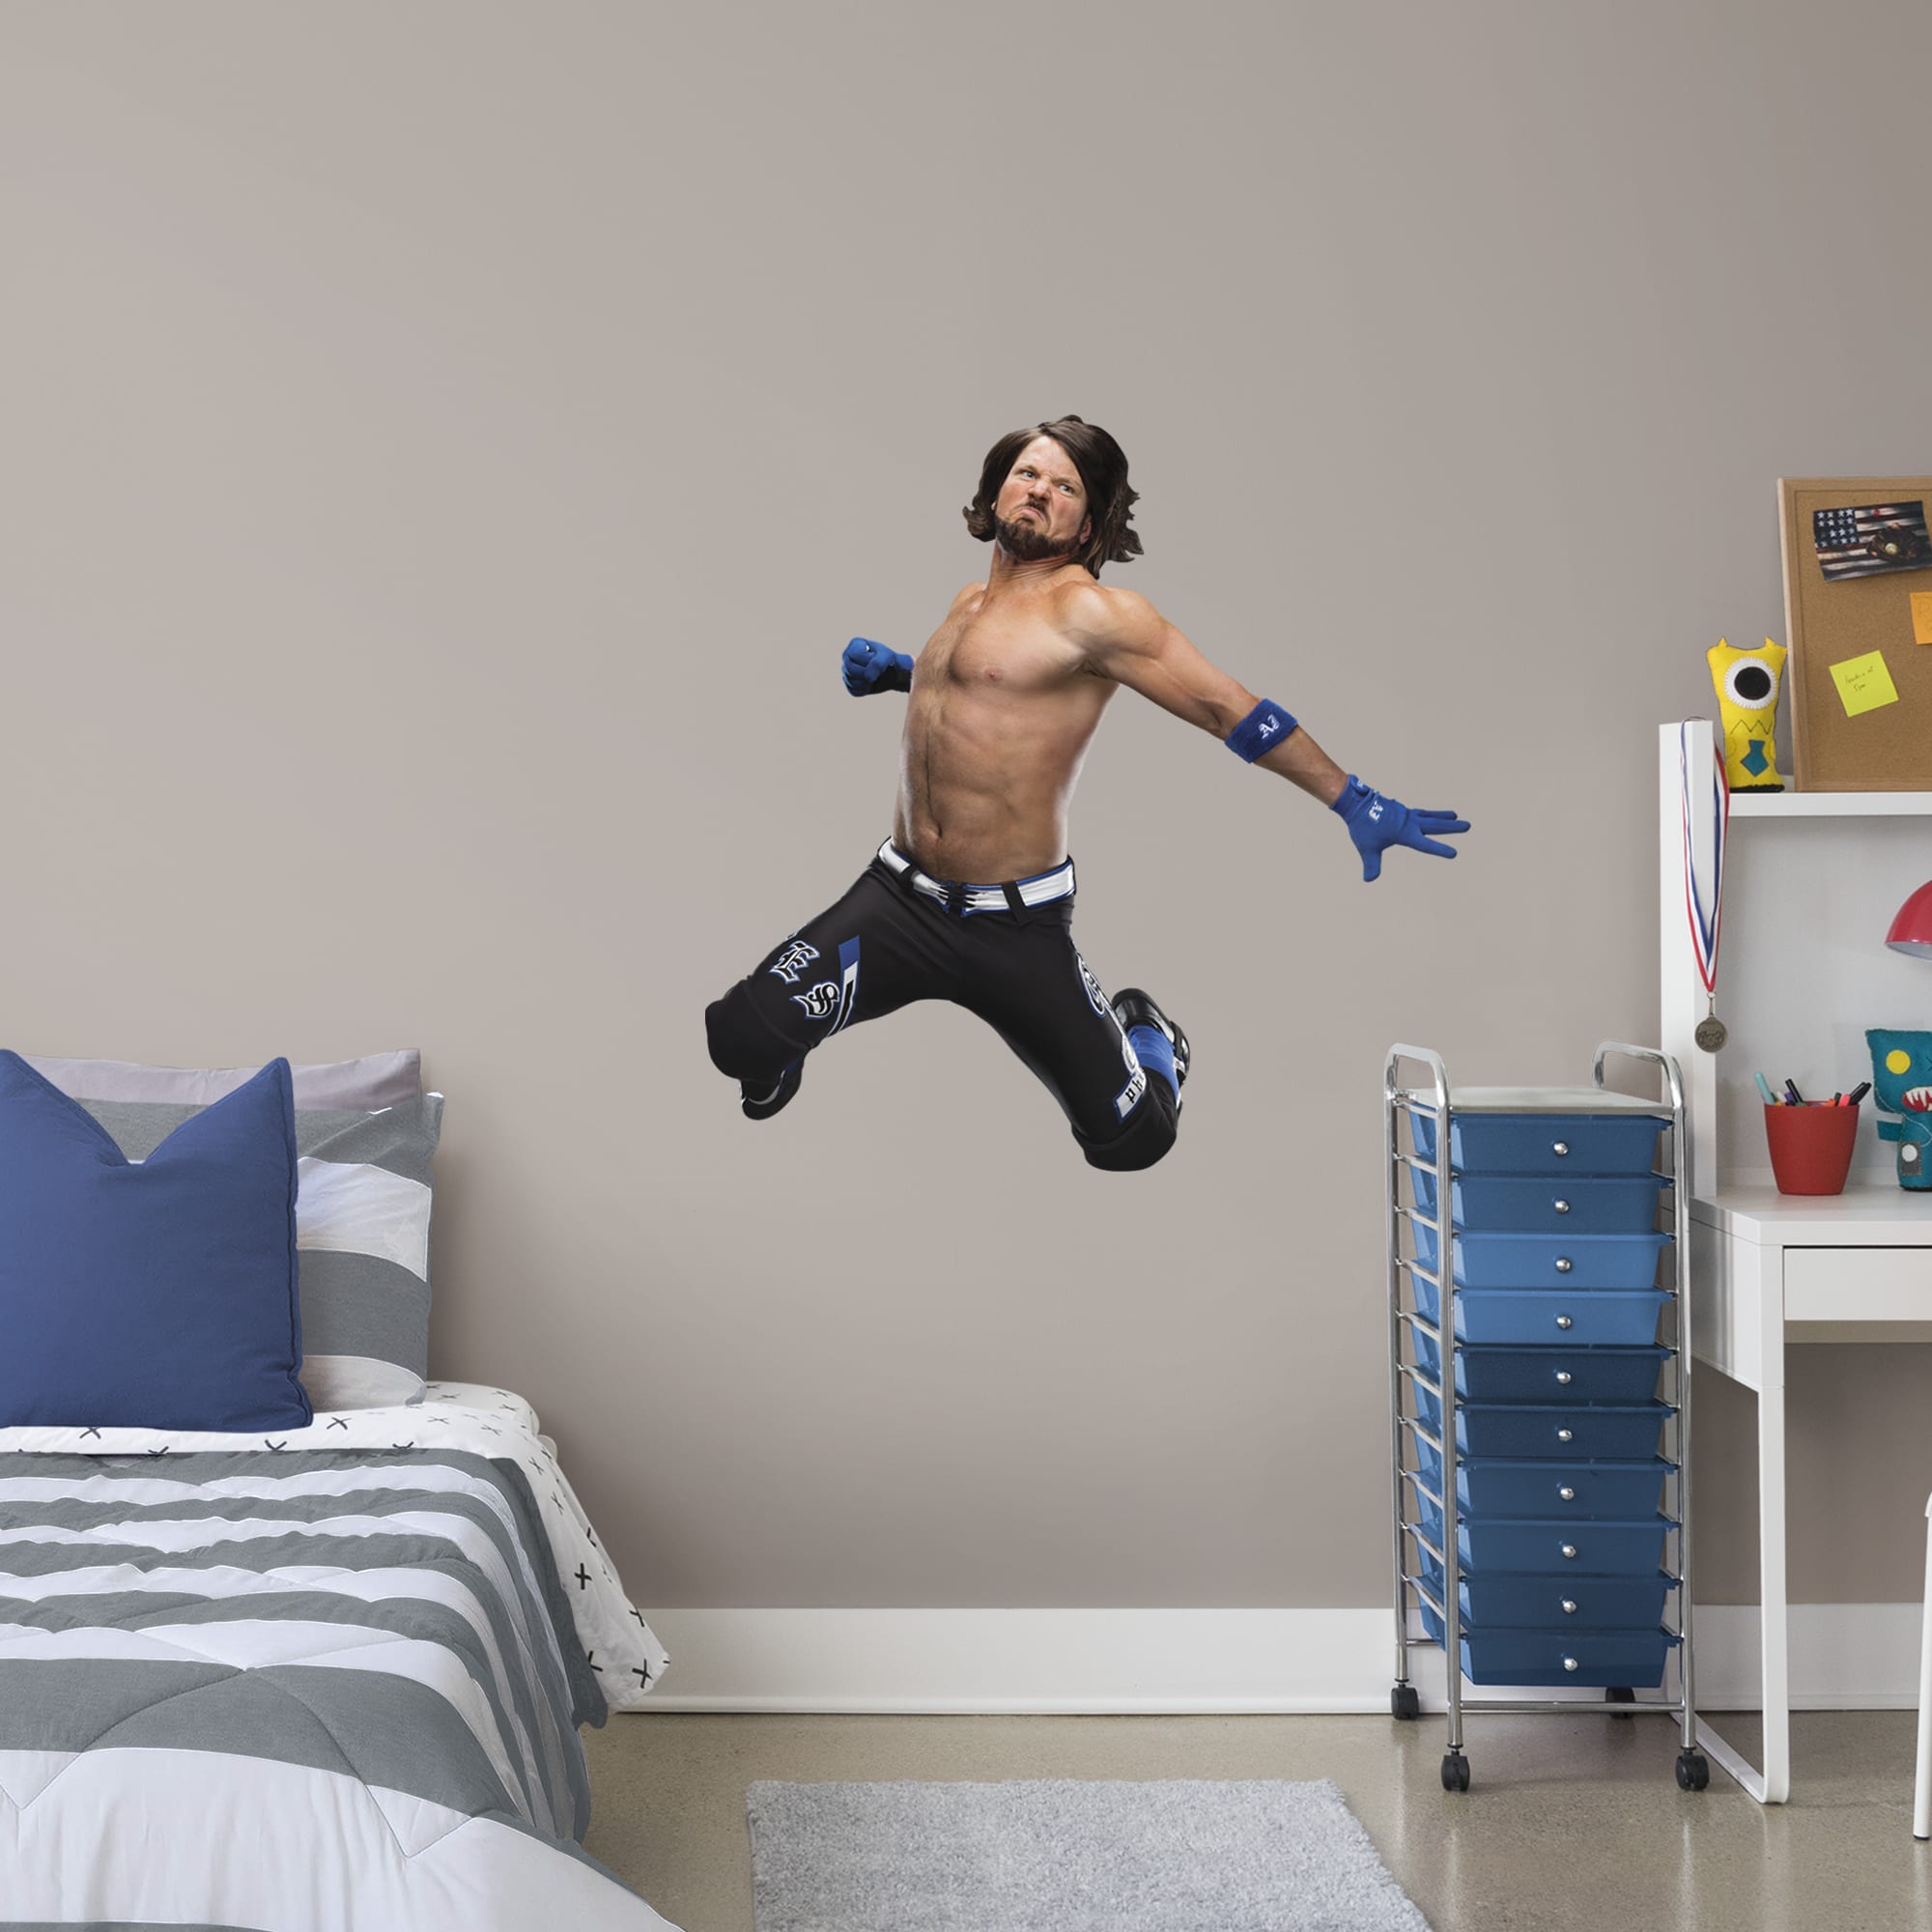 AJ Styles for WWE: Attack - Officially Licensed Removable Wall Decal Giant Superstar + 2 Decals (47"W x 47"H) by Fathead | Vinyl